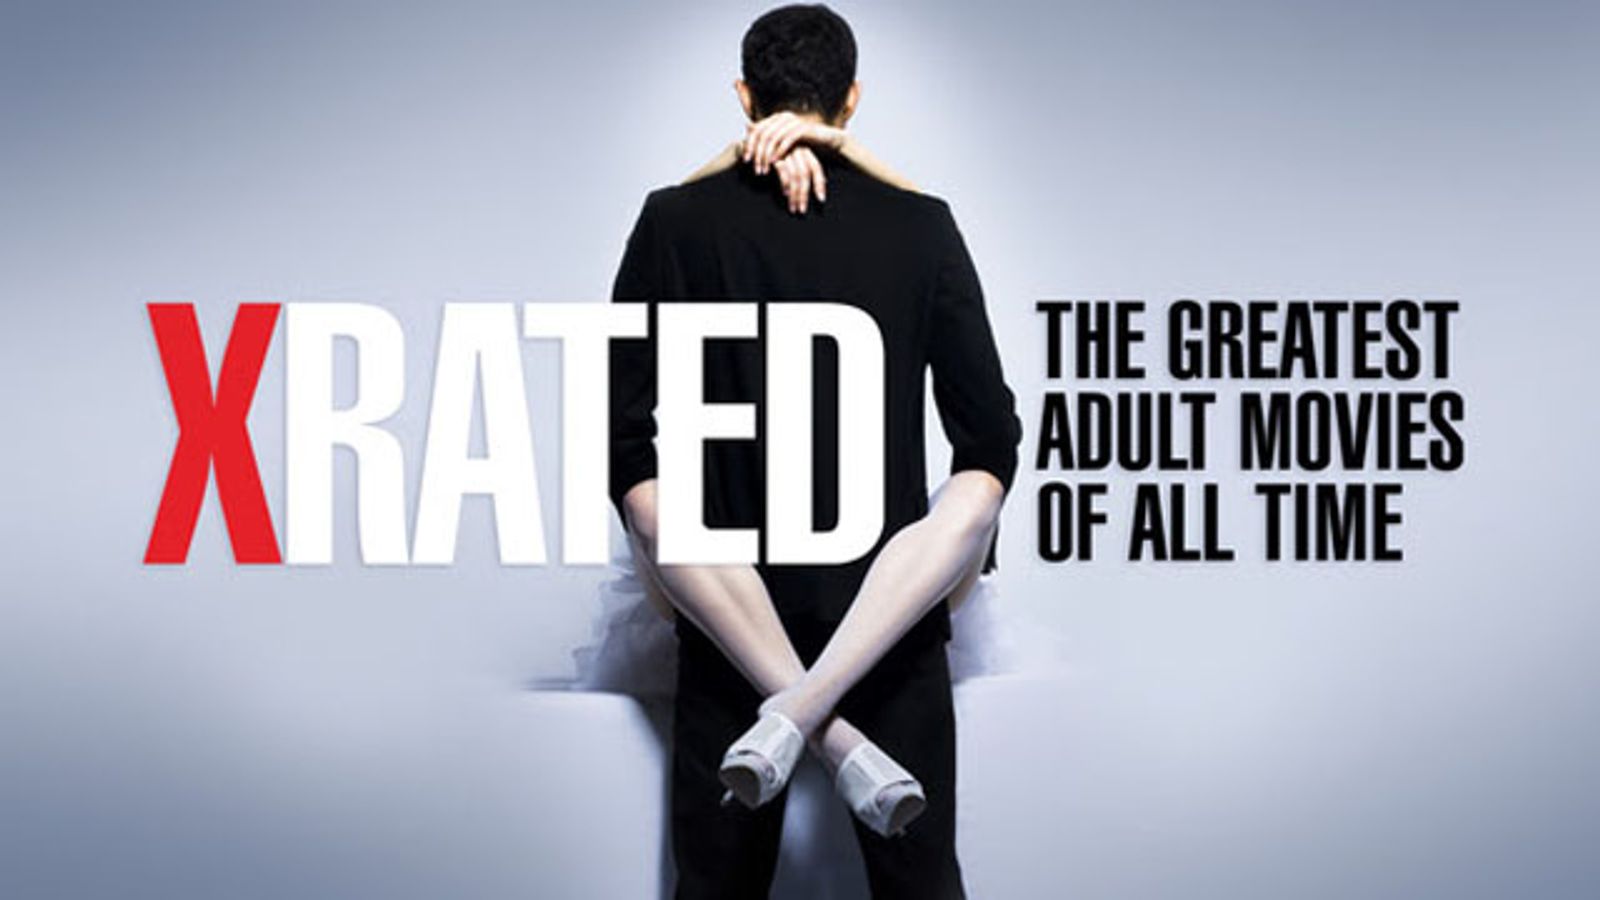 VOD Premiere Set For ‘X-Rated: The Greatest Adult Movies of All-Time’